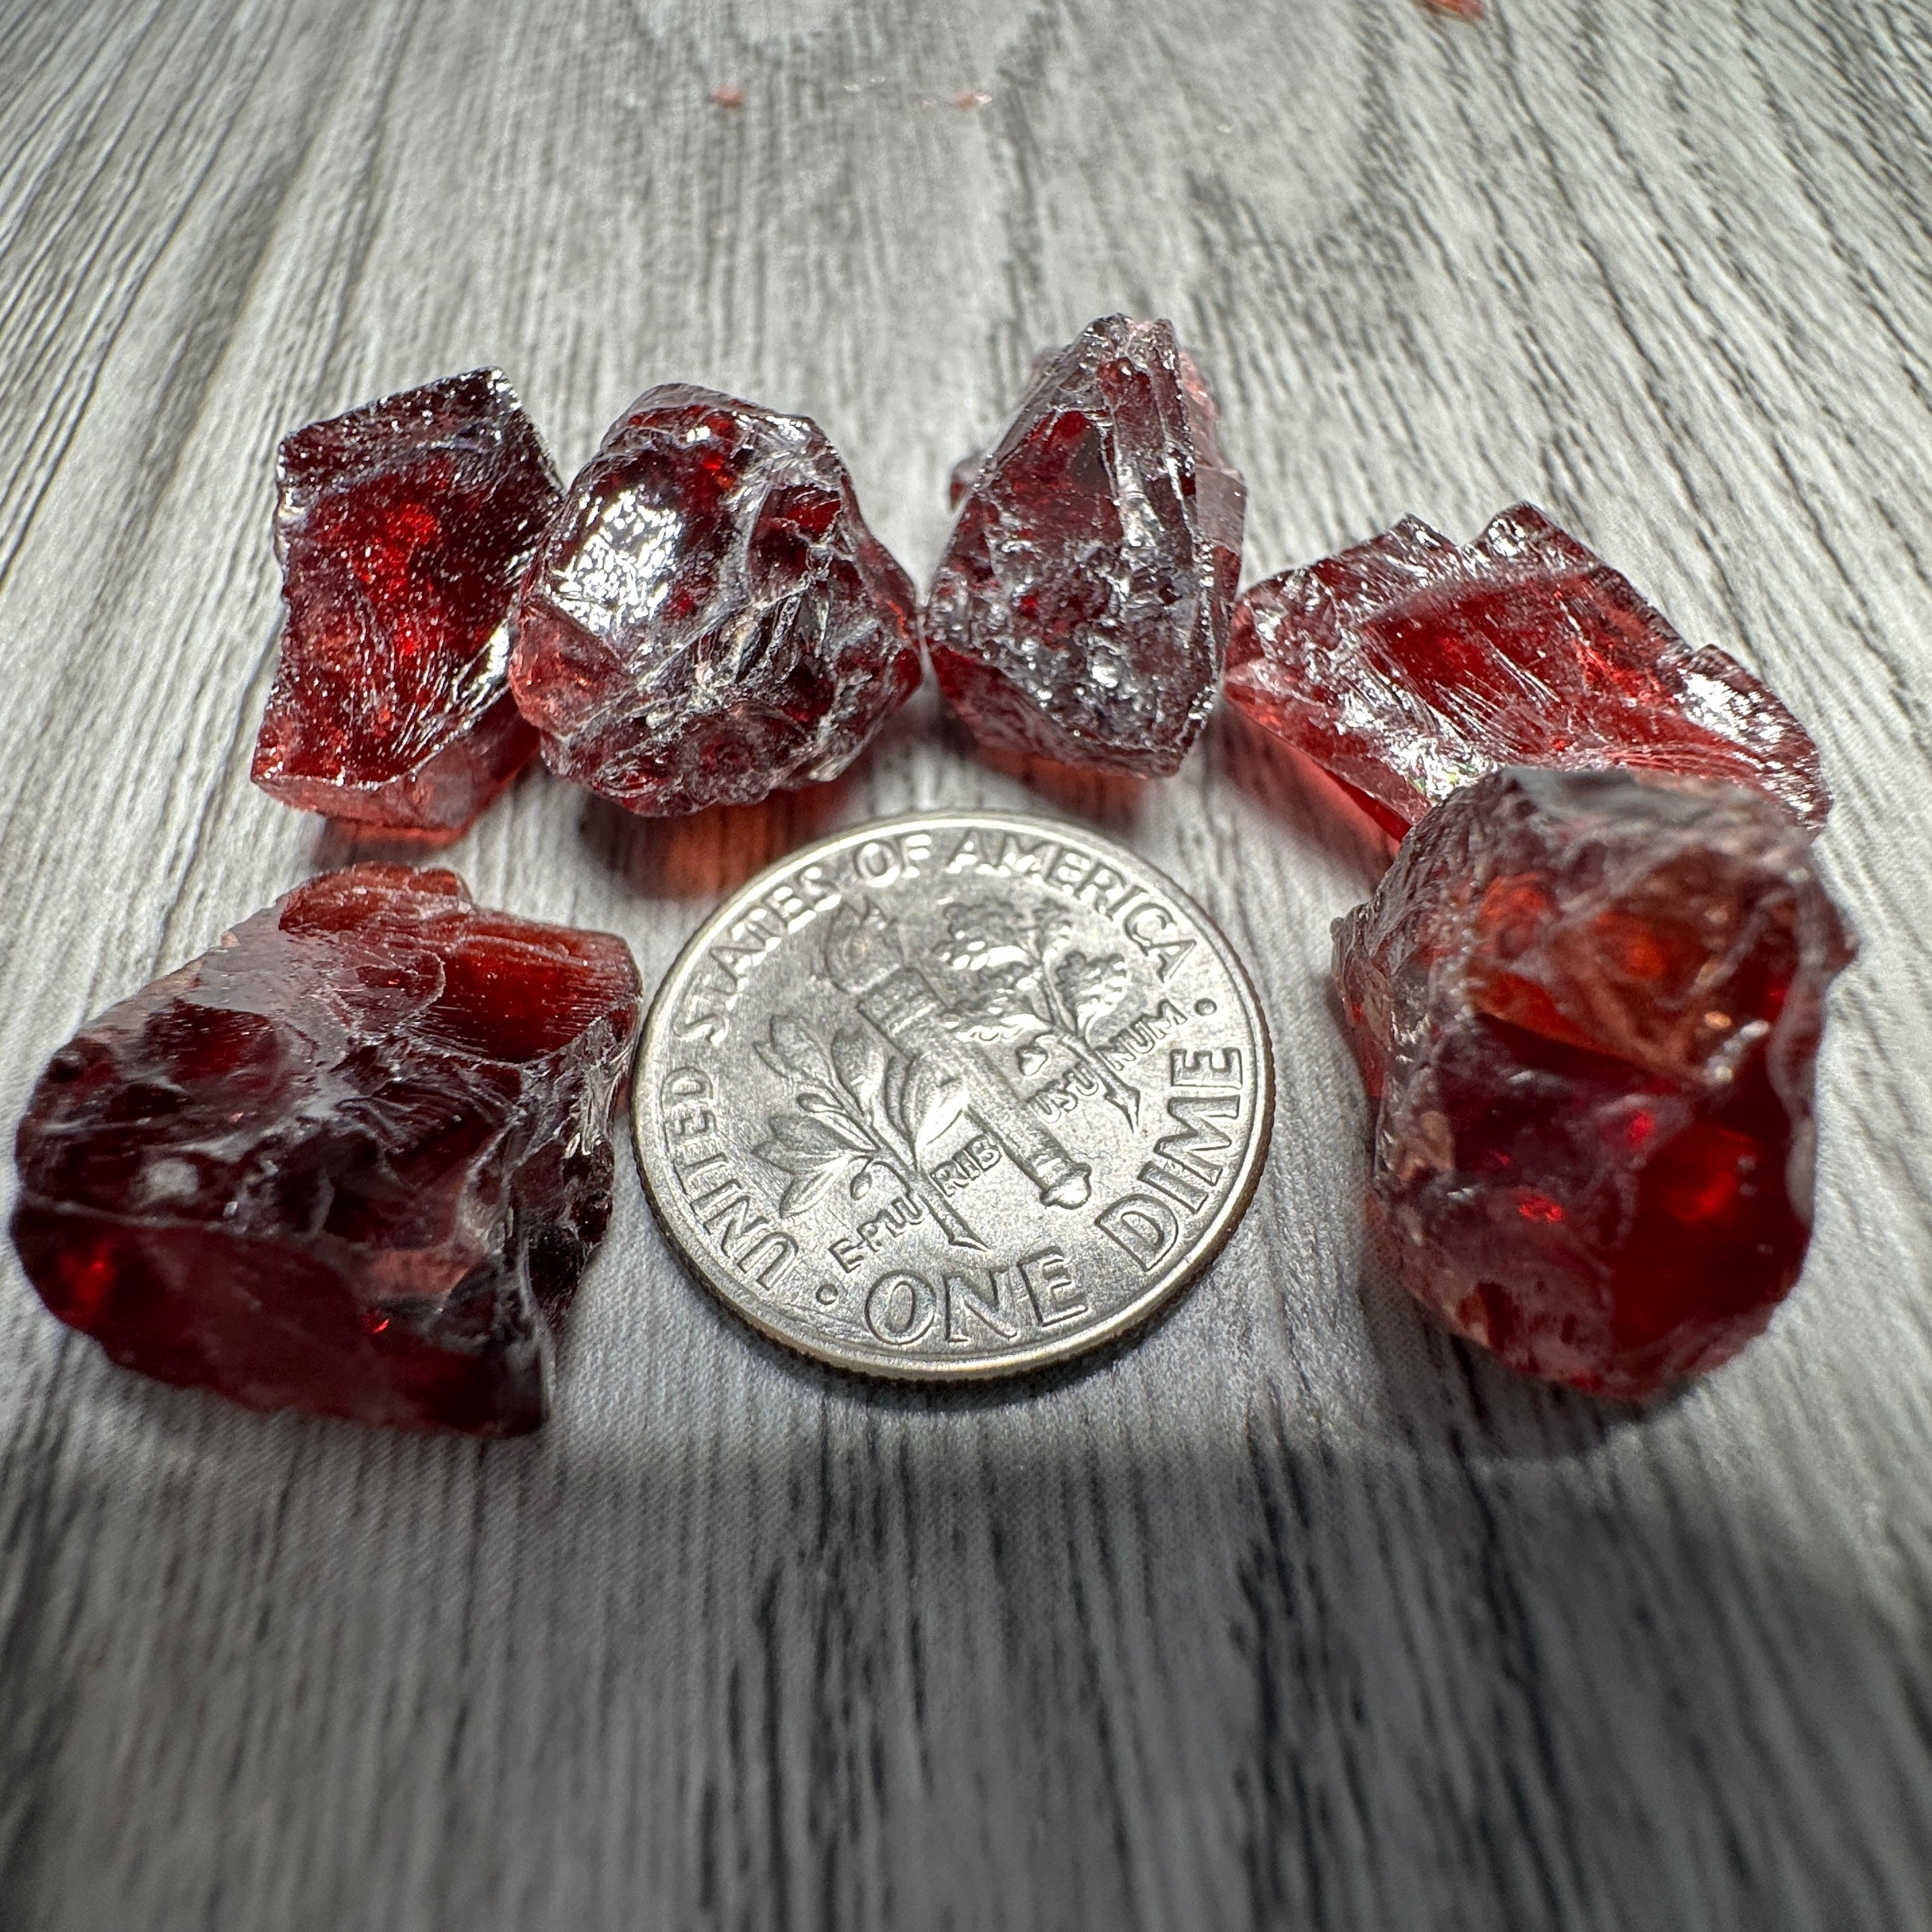 86.12ct Red Garnet Lot, 11.19ct - 16.13ct, clean with slight inclusions on the outside, Untreated Unheated